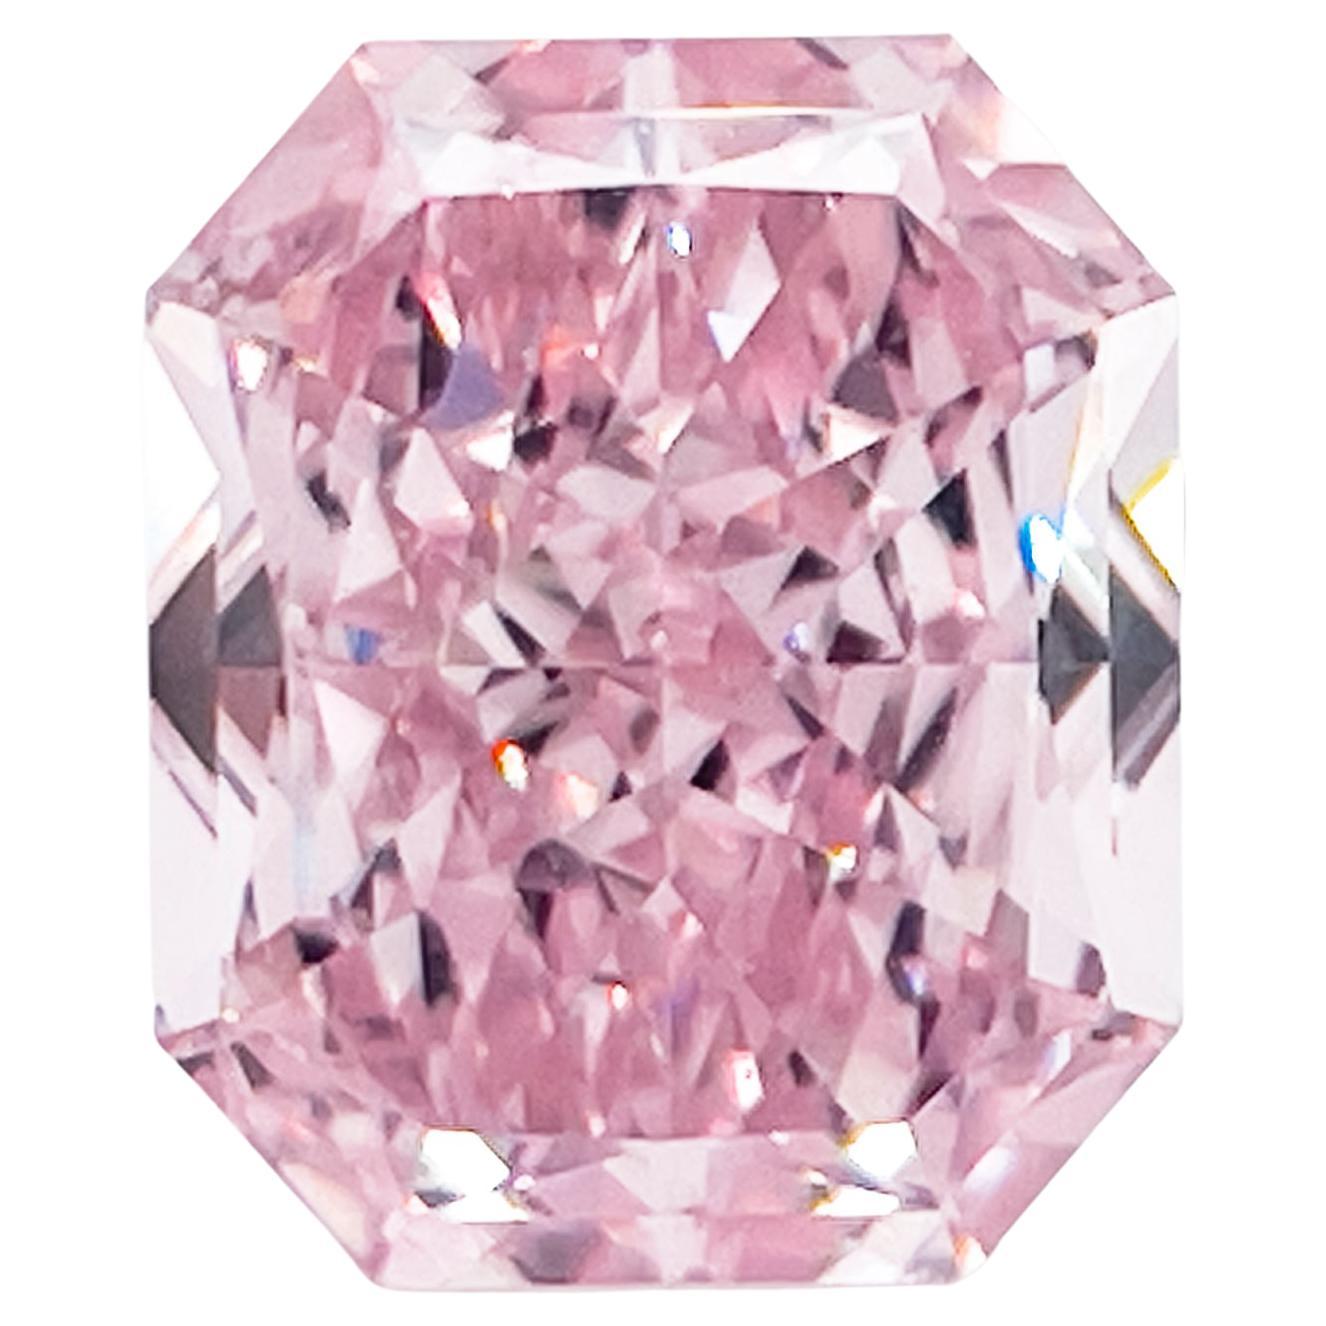 EXCEPTIONAL GIA Certified 3.23 Carat Fancy Pink 
INVESTMENT GRADE
Even color
Internally flawless Clarity

The main stone weighs 3.23 carats 